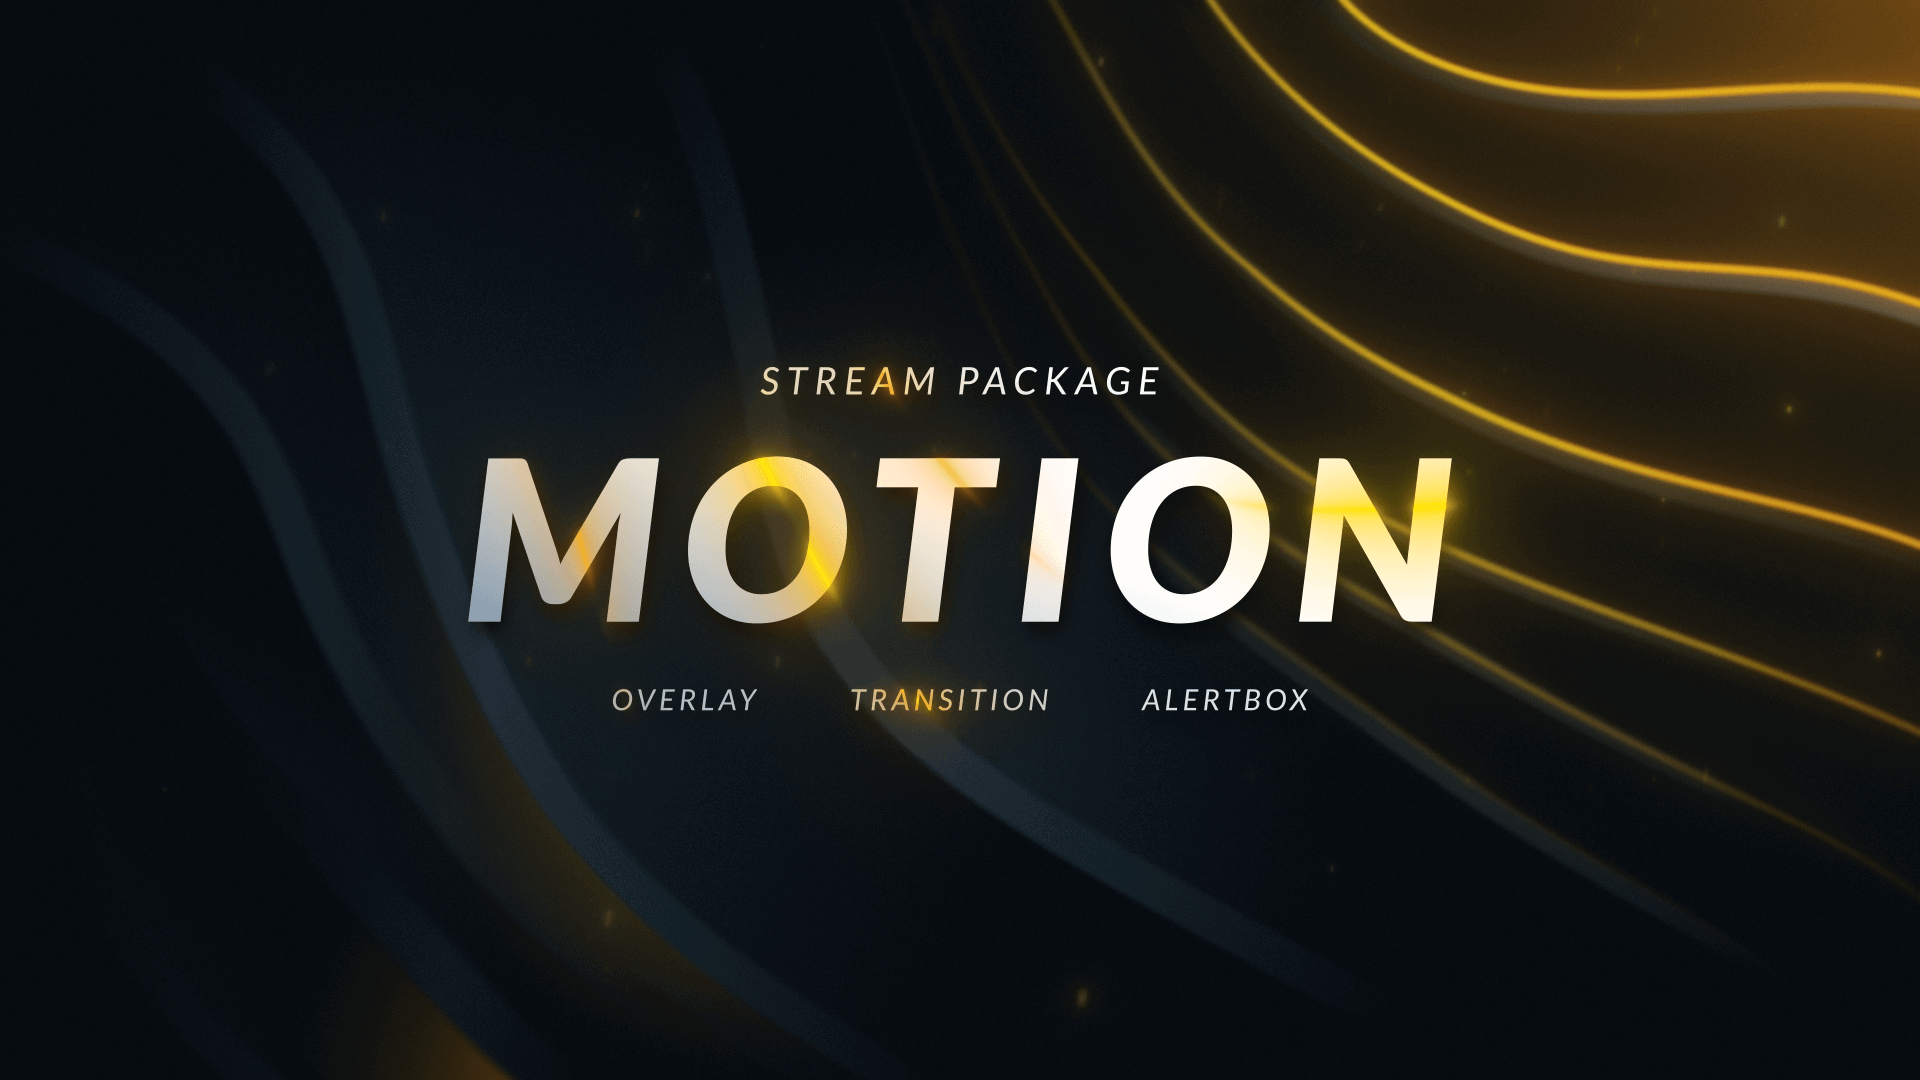 Motion Animated Stream Package with Overlays, Alerts and Transition for Twitch and OBS Studio